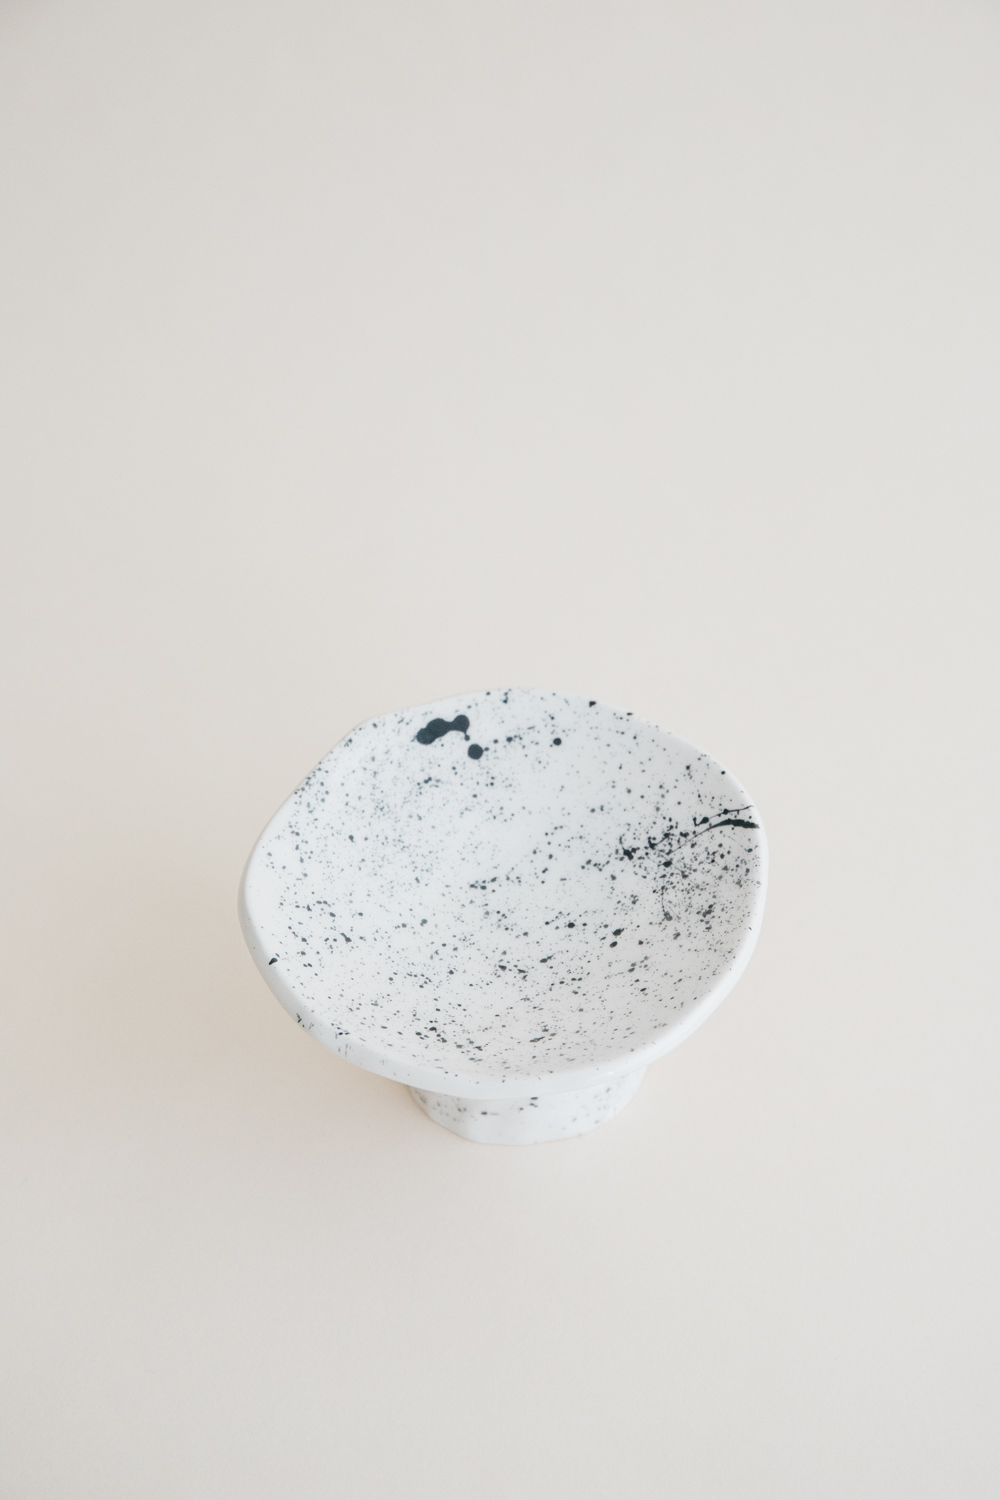 Small Handmade Ceramic Cookie Stand - Speckled